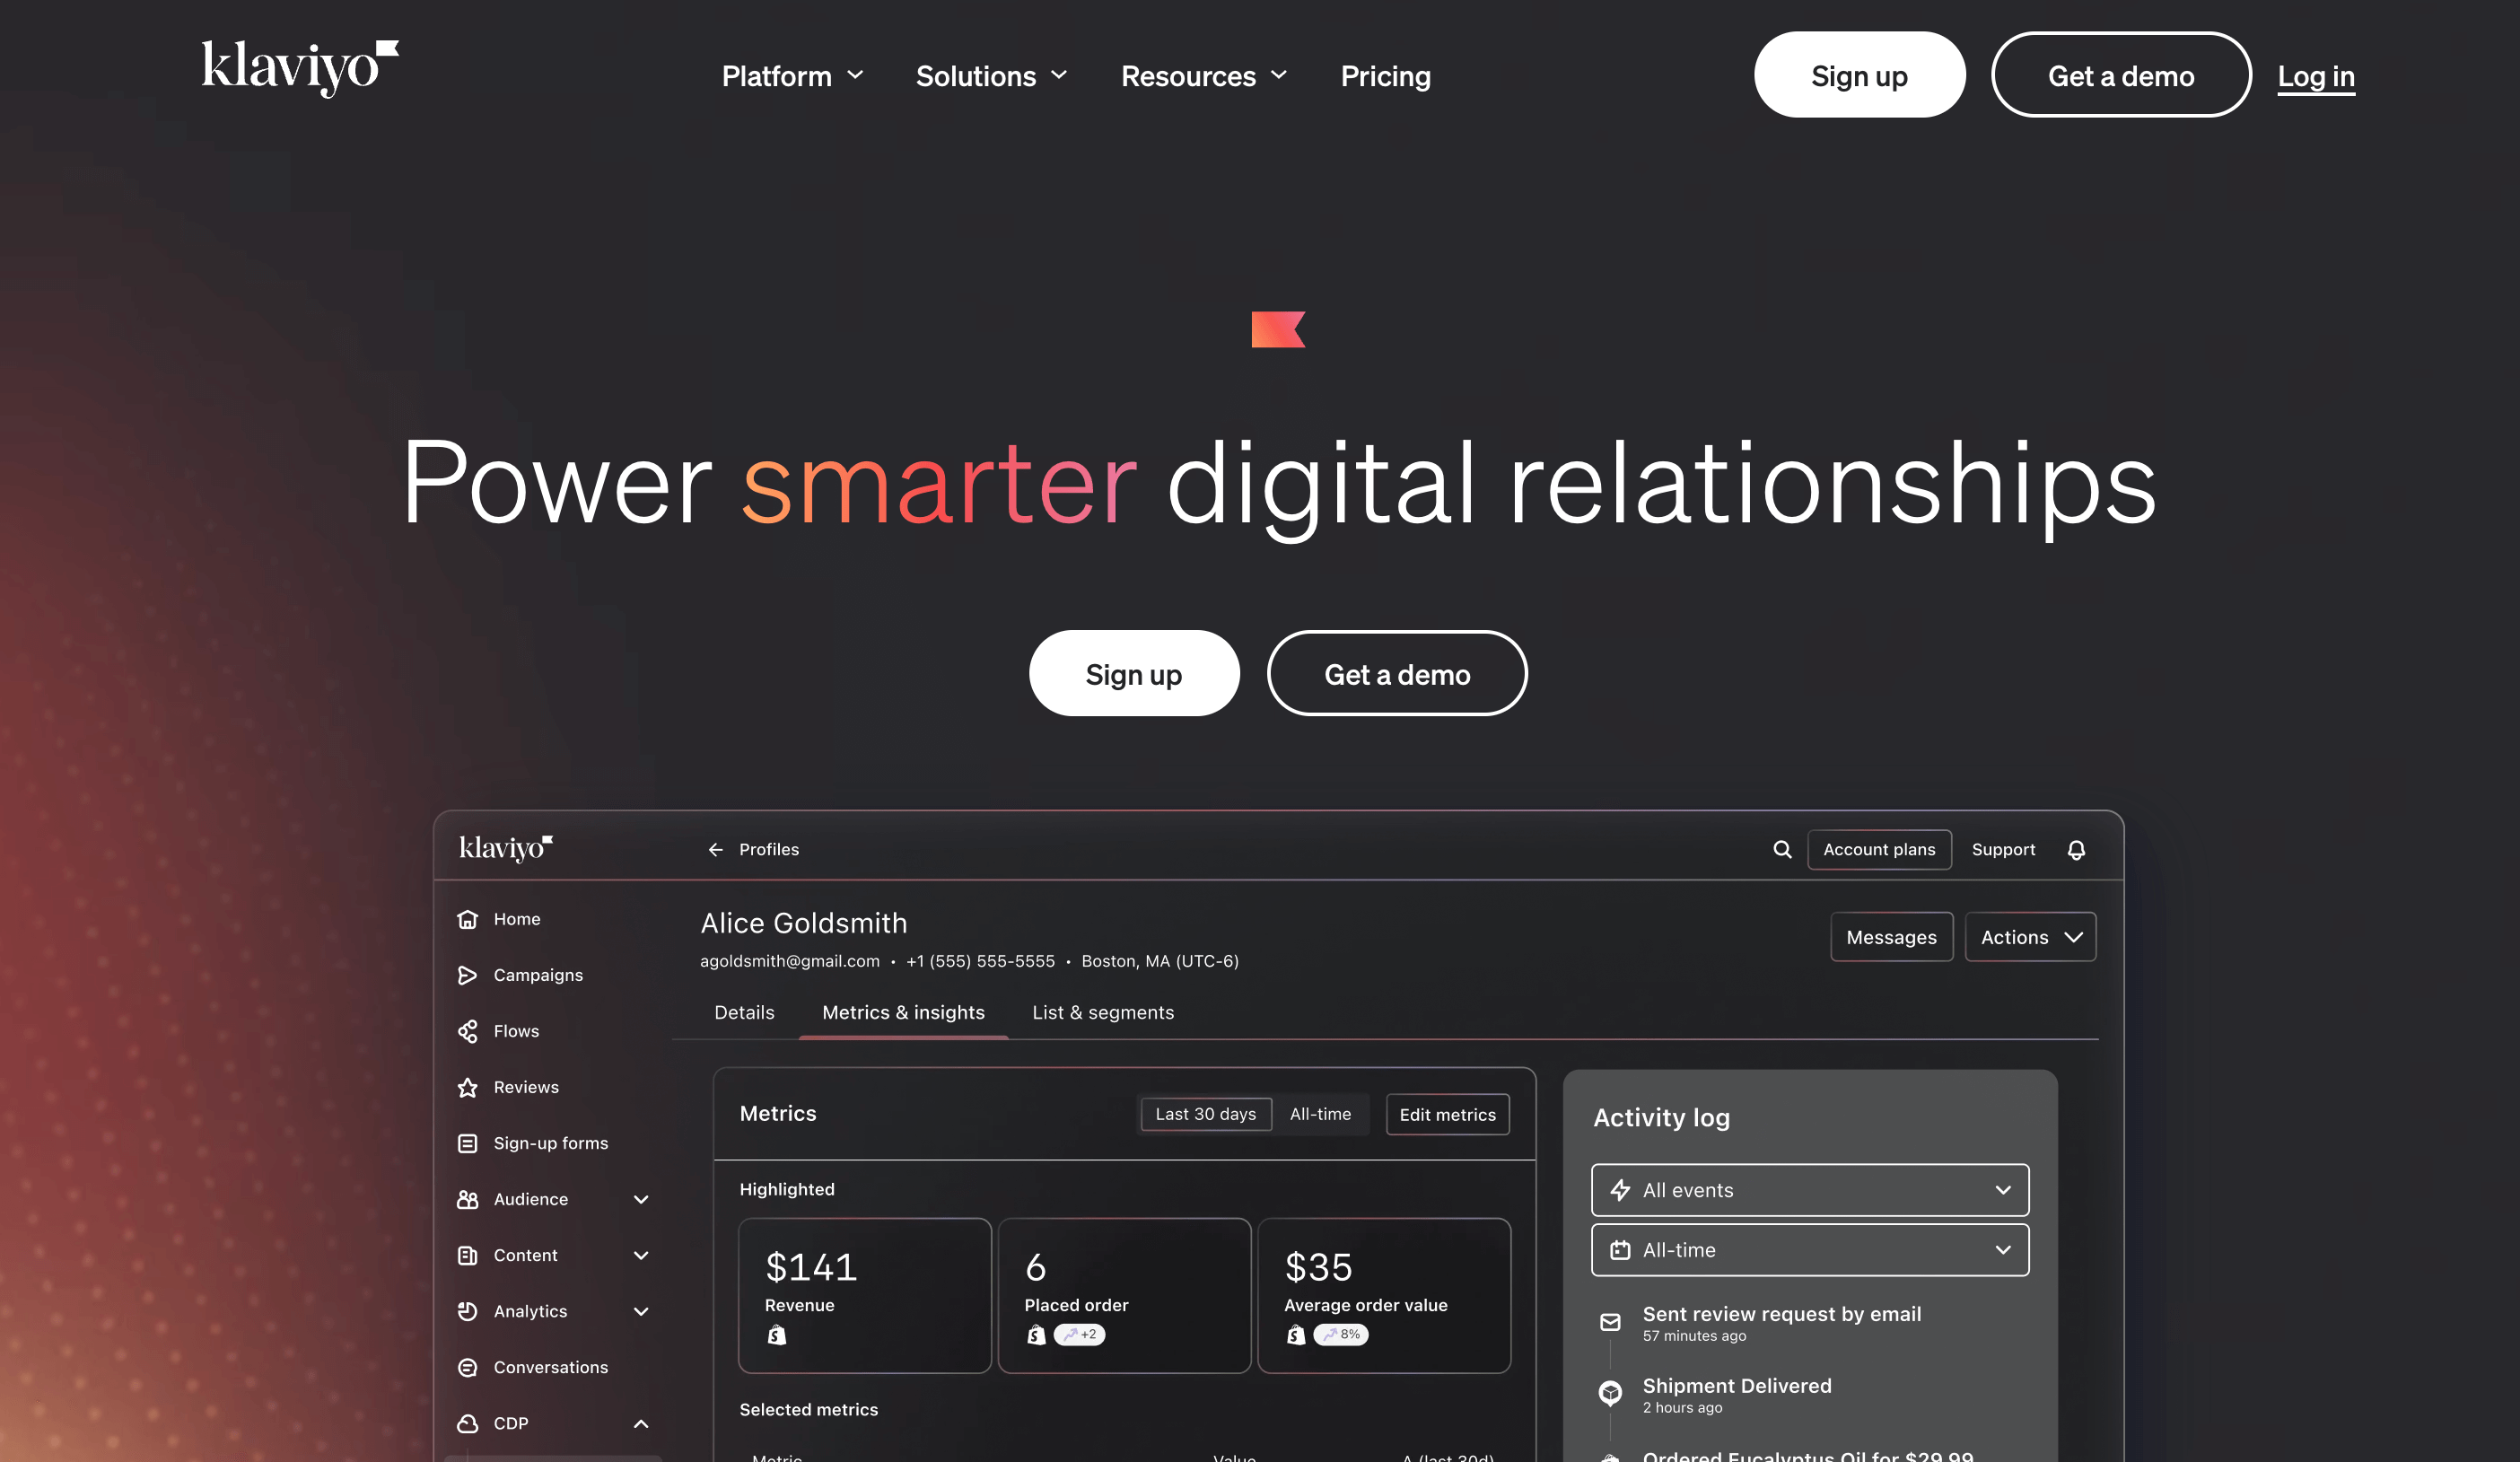 The Klaviyo home page, featuring a headline that says, “Power smarter digital relationships.”